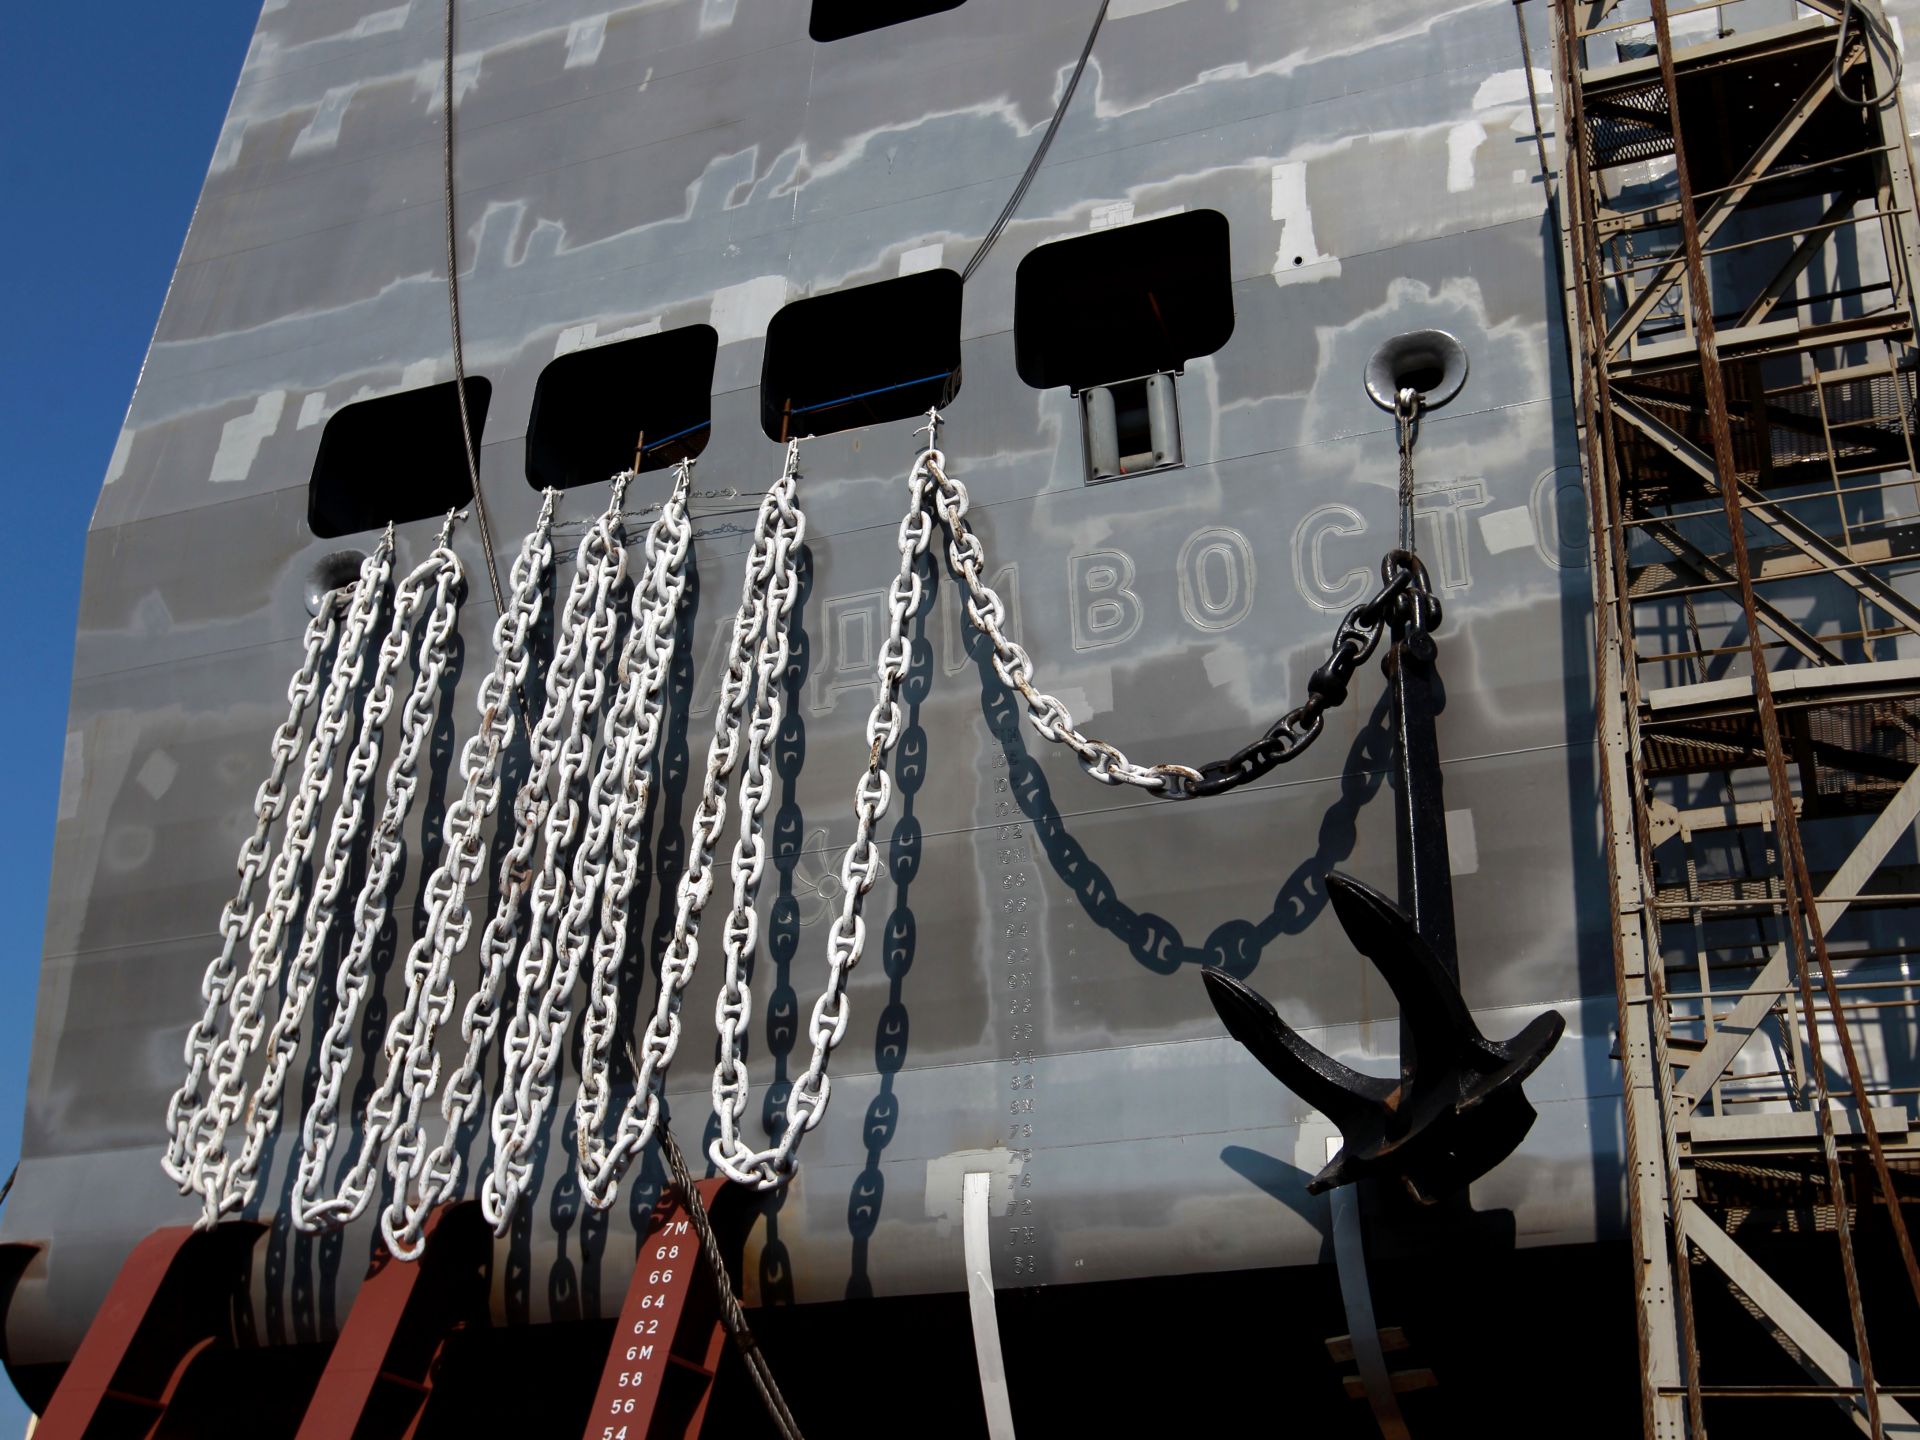 The Russian Mistral ship to be equipped with domestic arms